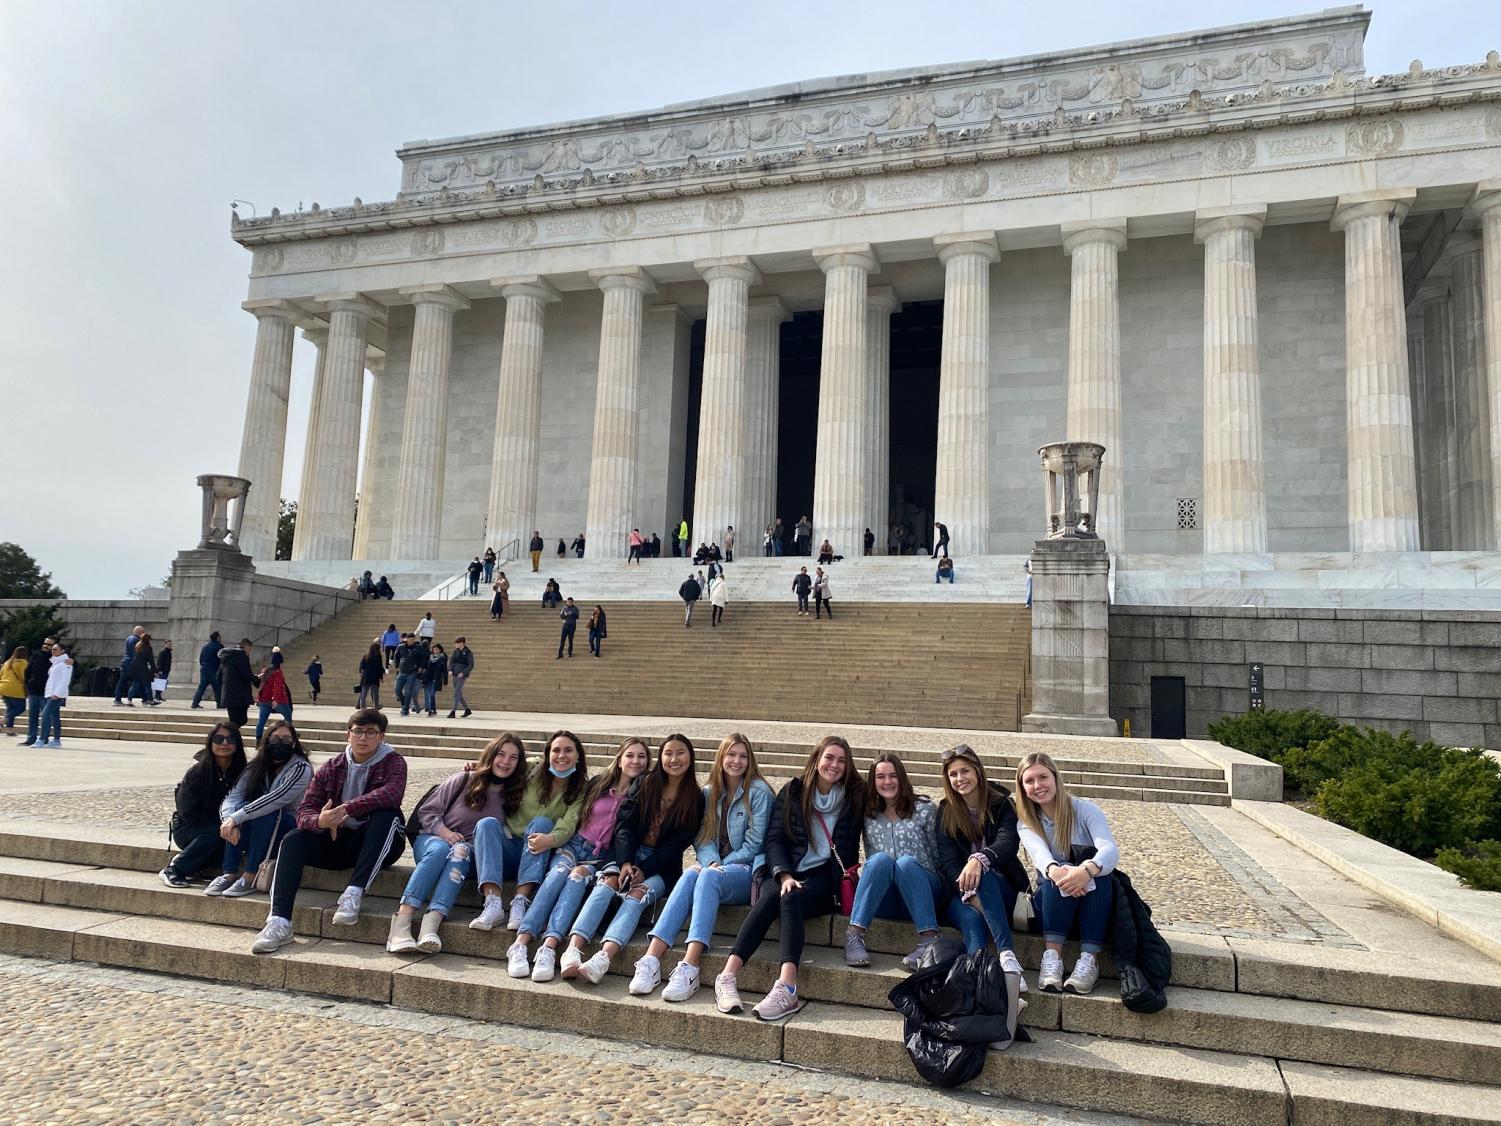 FCCLA+Faces+DC+with+Warm+Courage+and+High+Hopes%21